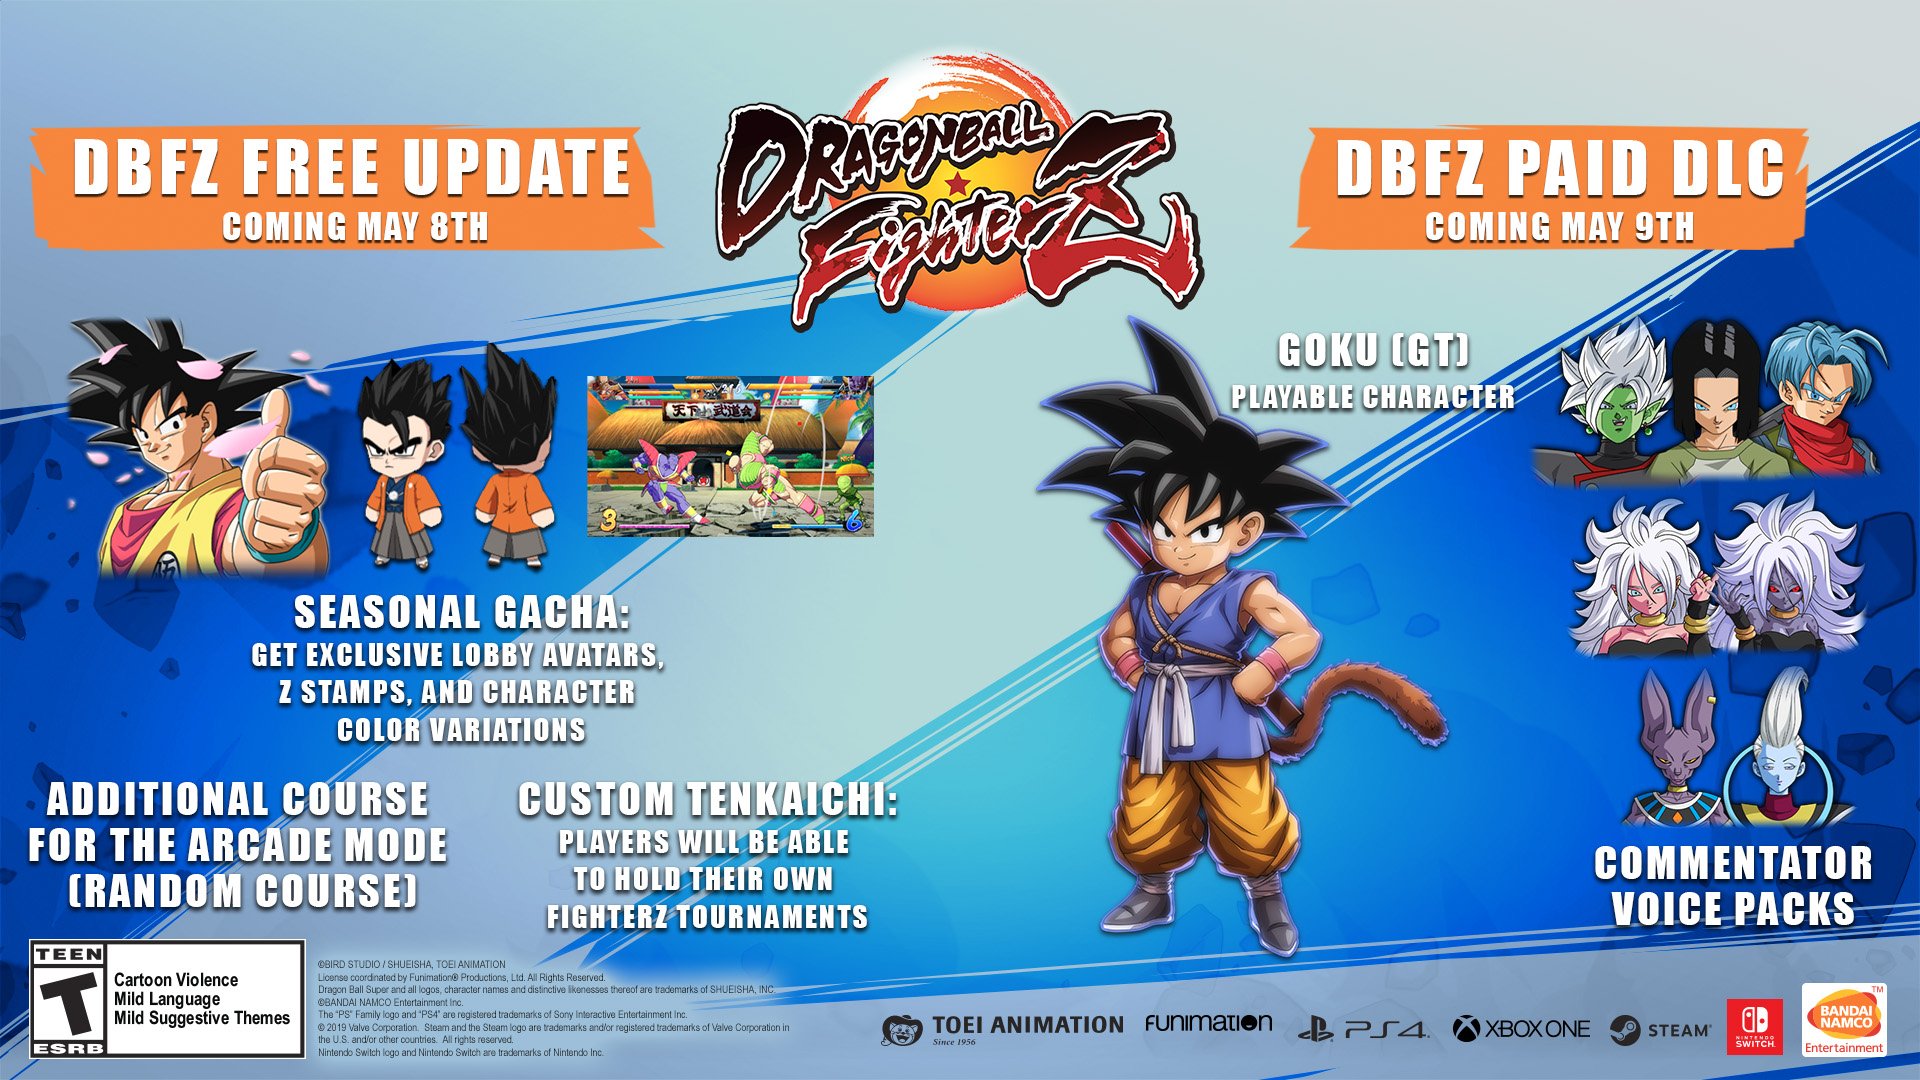 News | "Dragon Ball FighterZ" Patch 1.17 Notes & Upcoming Adjustments